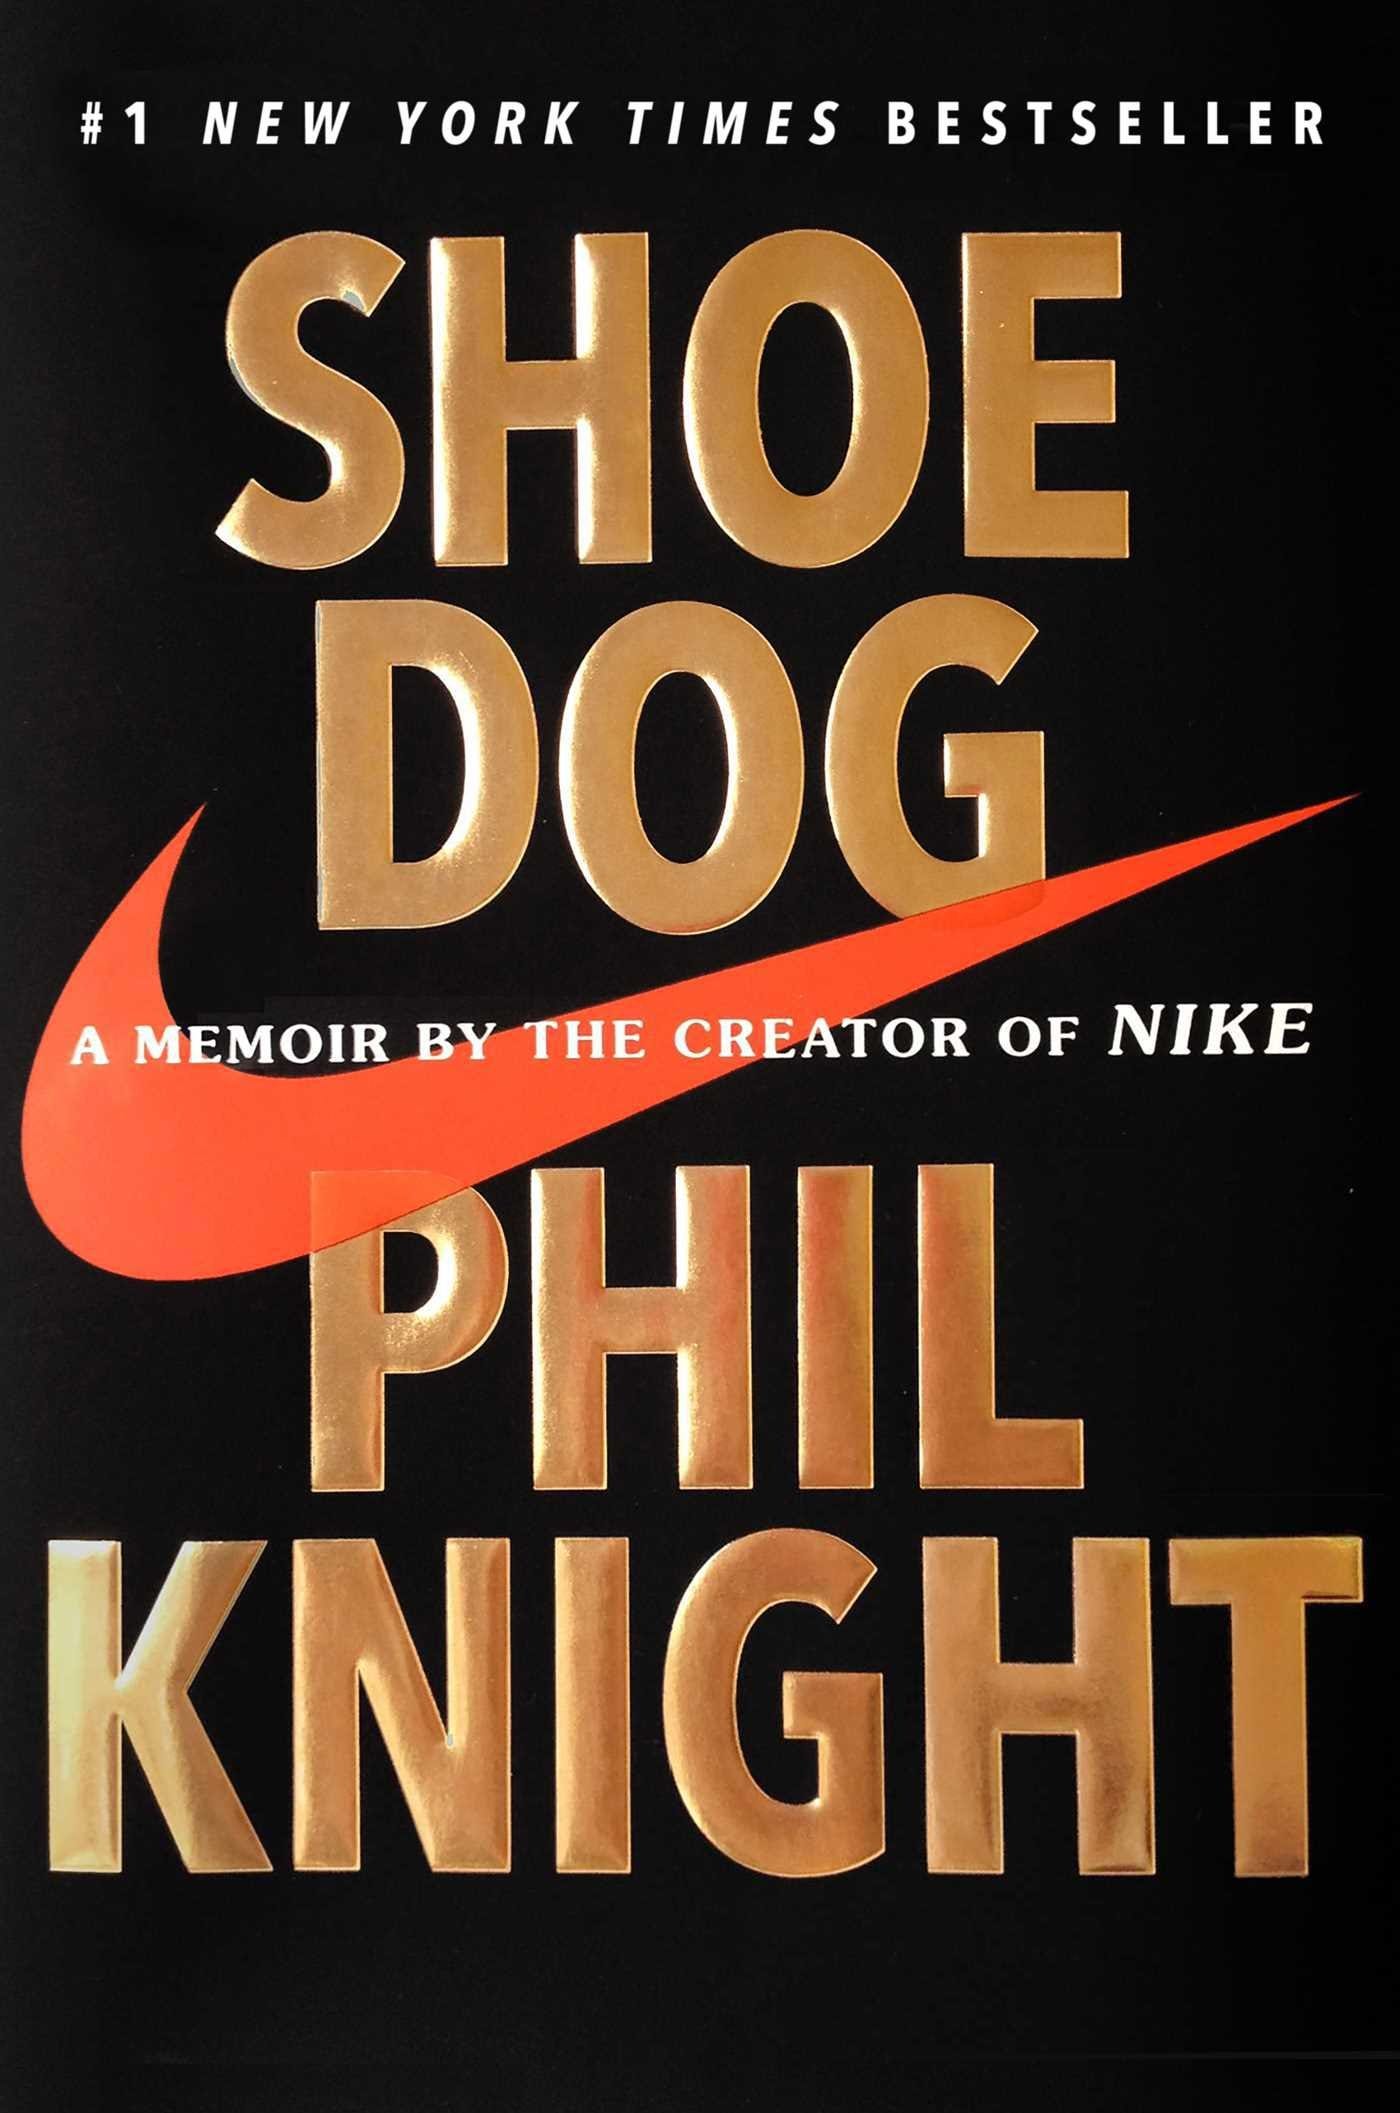 10 Lessons from the Founder of Nike | by Danielle Newnham | Medium